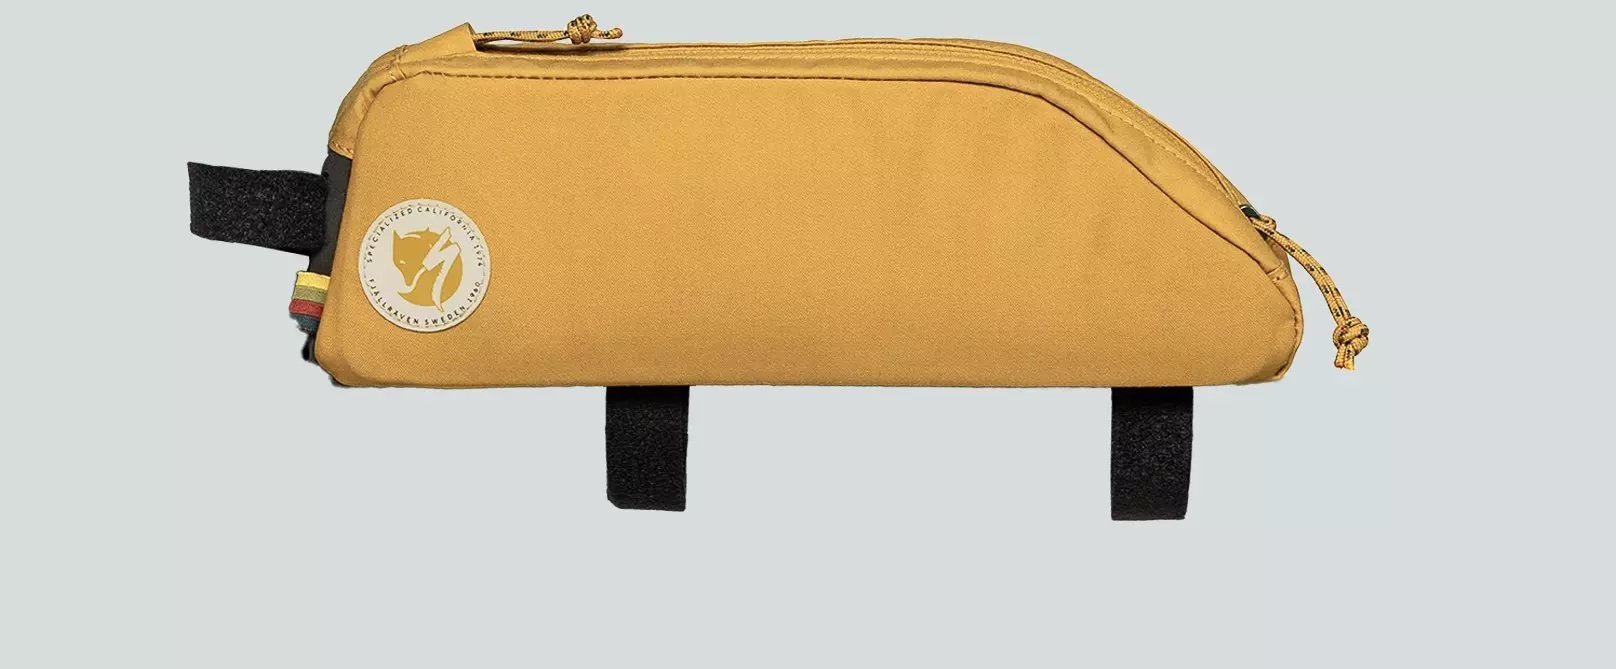 Specialized /Fjallraven Top Tube Bag One Size Ochre